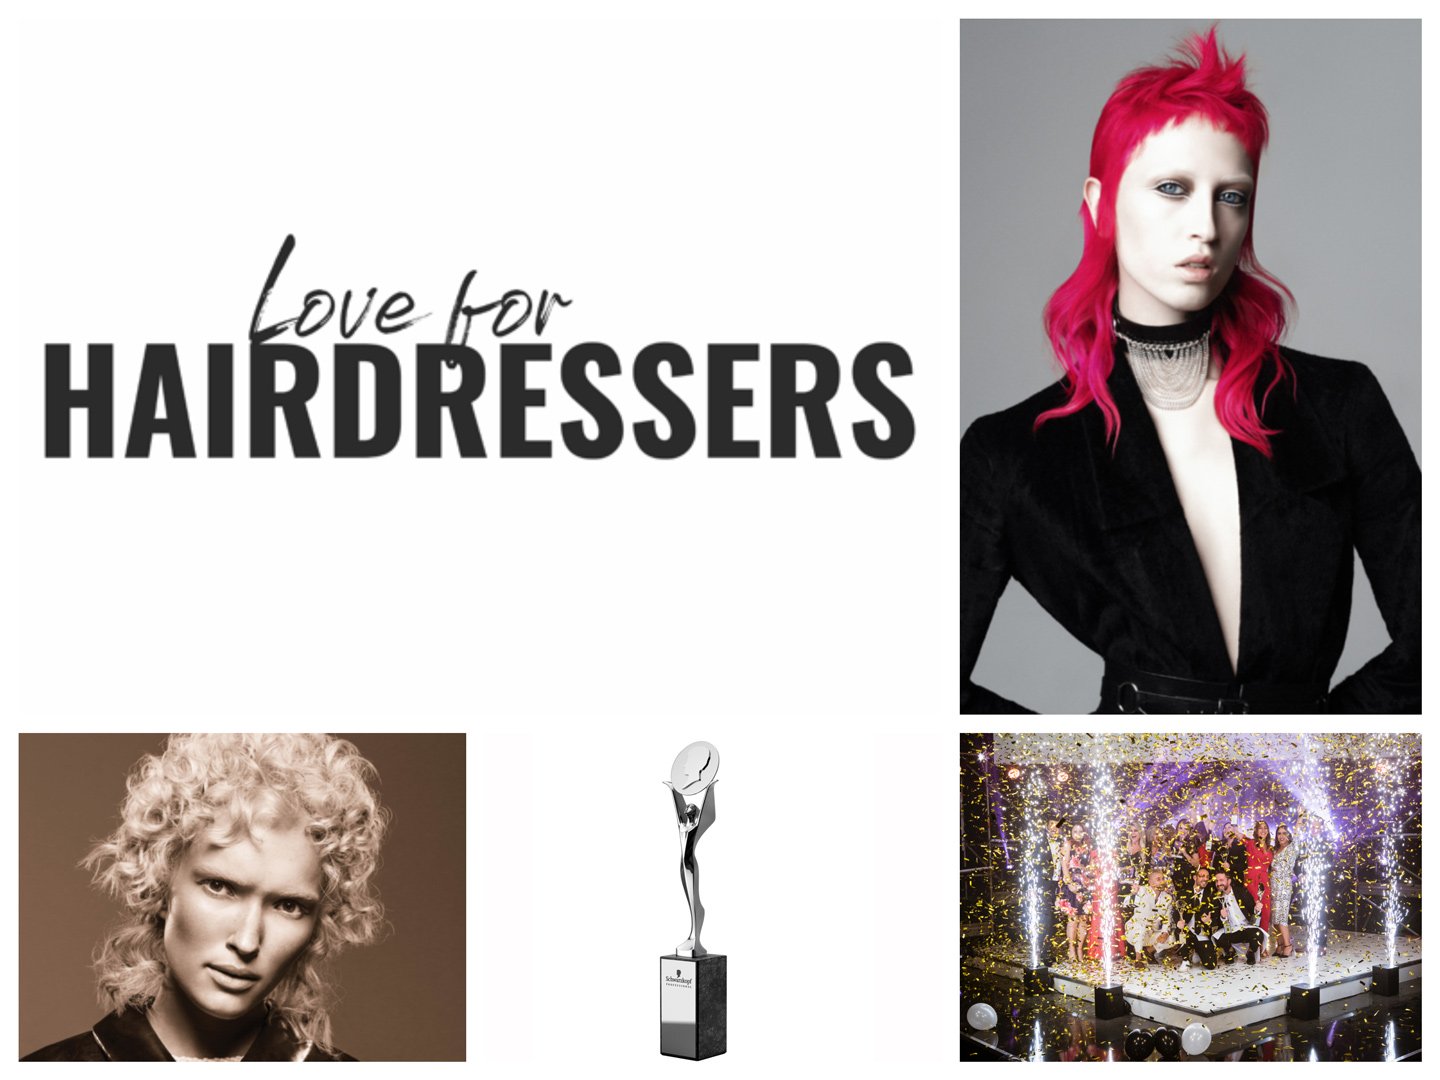 Faszination-Friseurberuf-Love-for-Hairdressers-meets-Hairdressing-Awards-5121-1